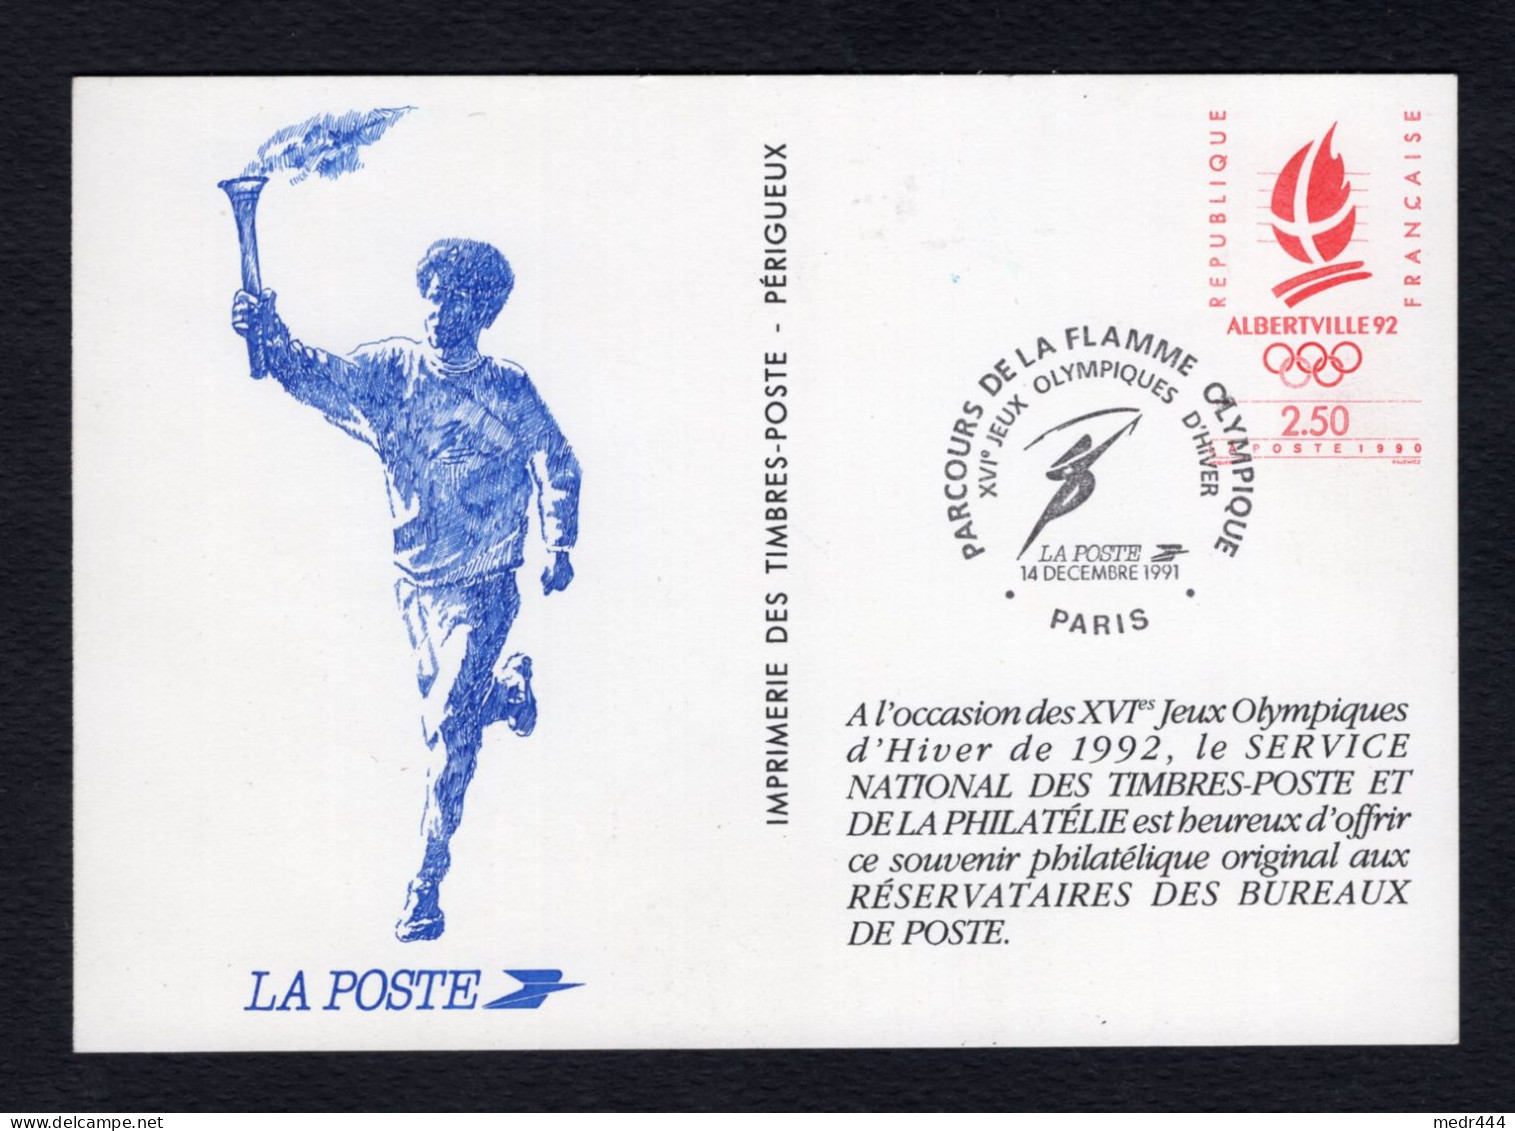 France1992 - Sports - XVI Winter Olympic Games Albertville 92 - Commemorative Label - Superb*** - Excellent Quality - Sports